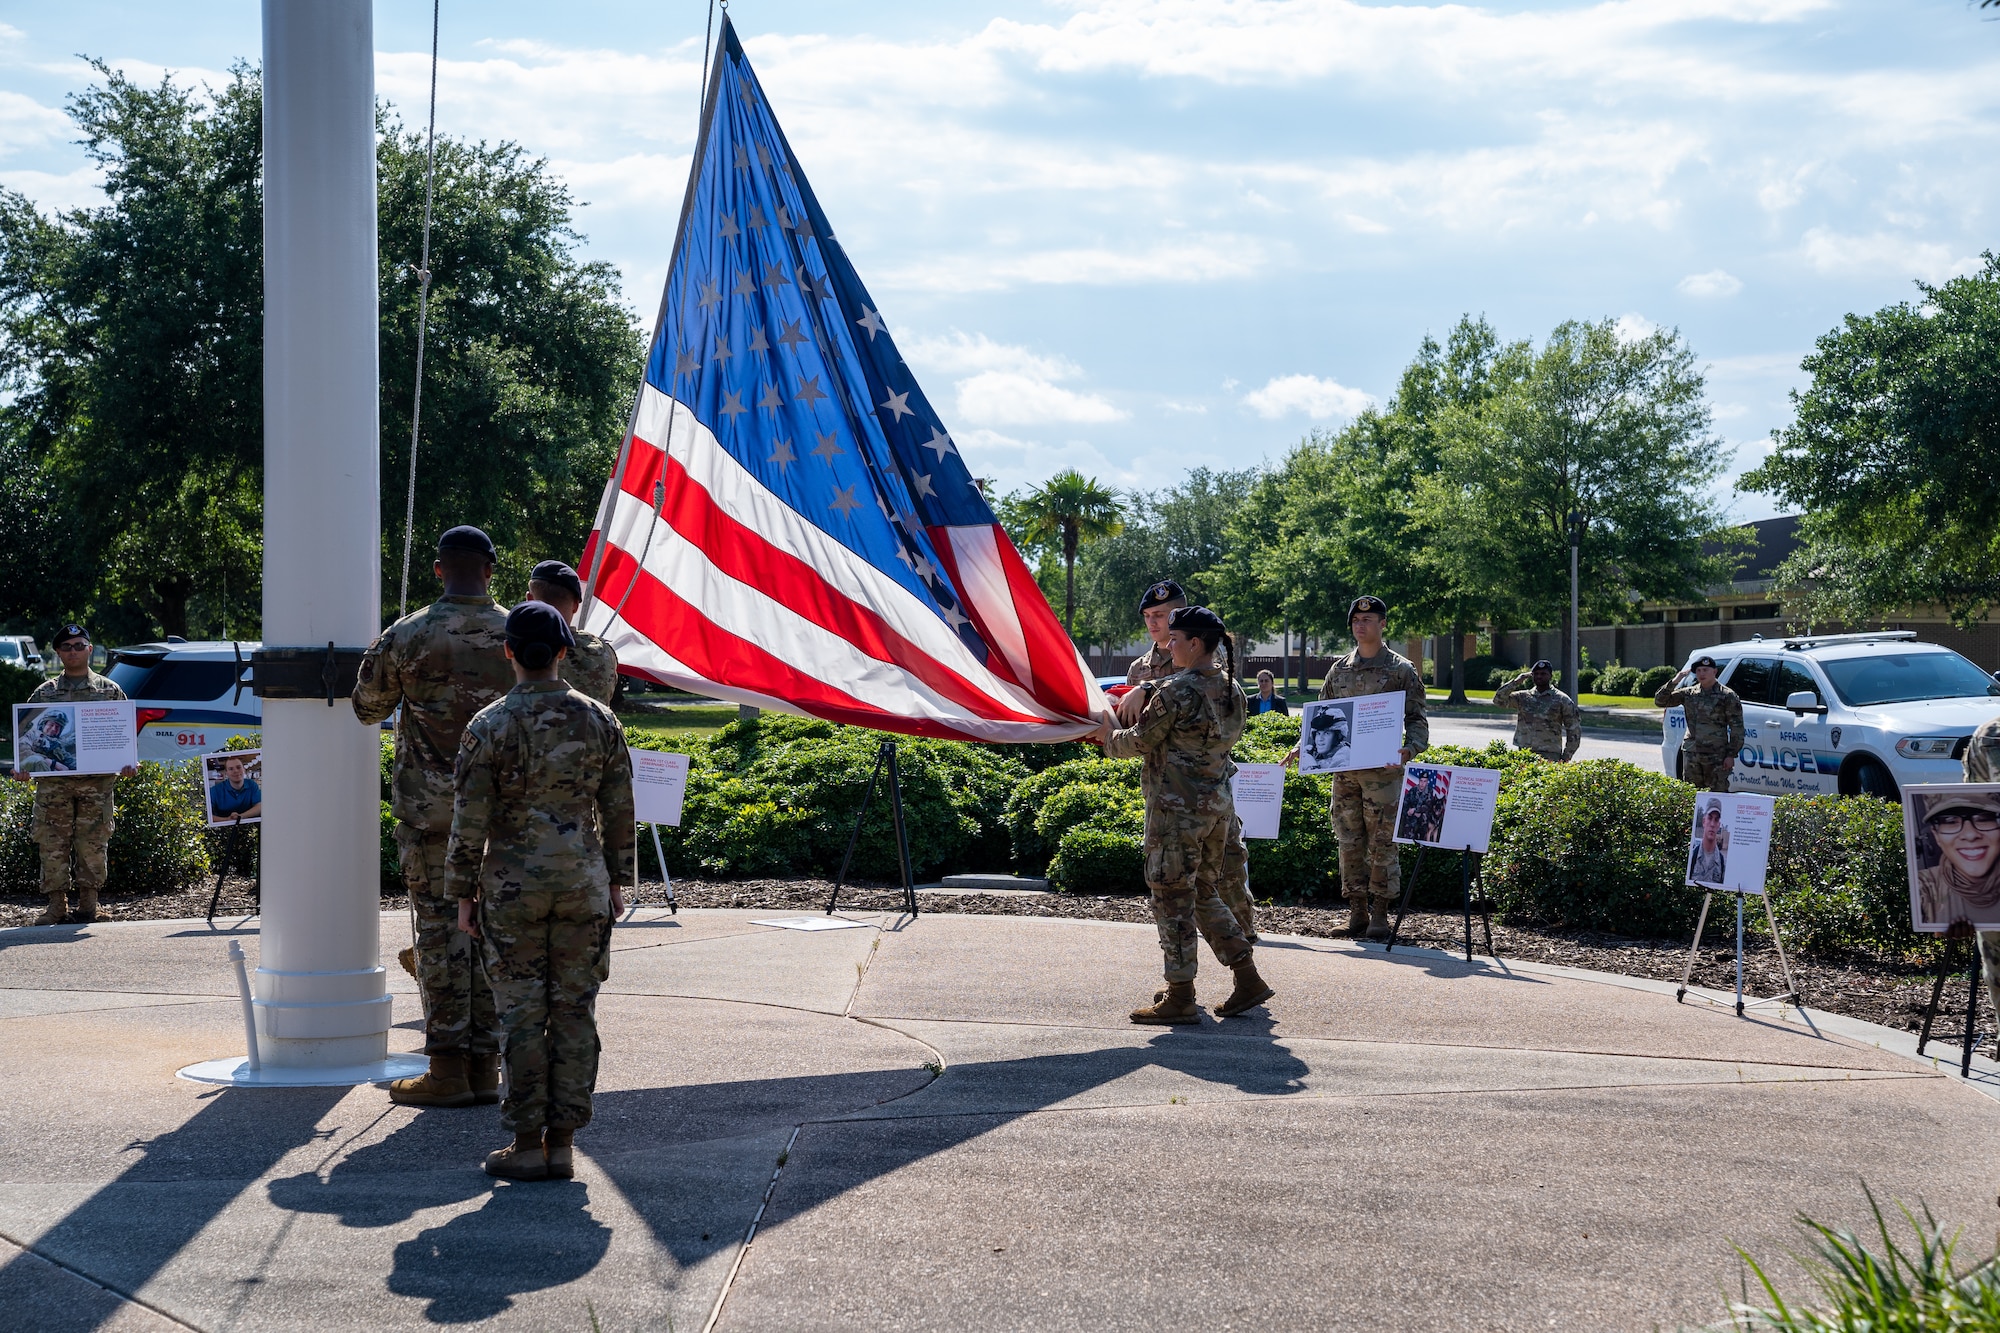 Airmen from 81st Security Forces Squadron lower the American flag during the retreat ceremony for National Police Week at Keesler Air Force Base, Mississippi, May 19, 2023.